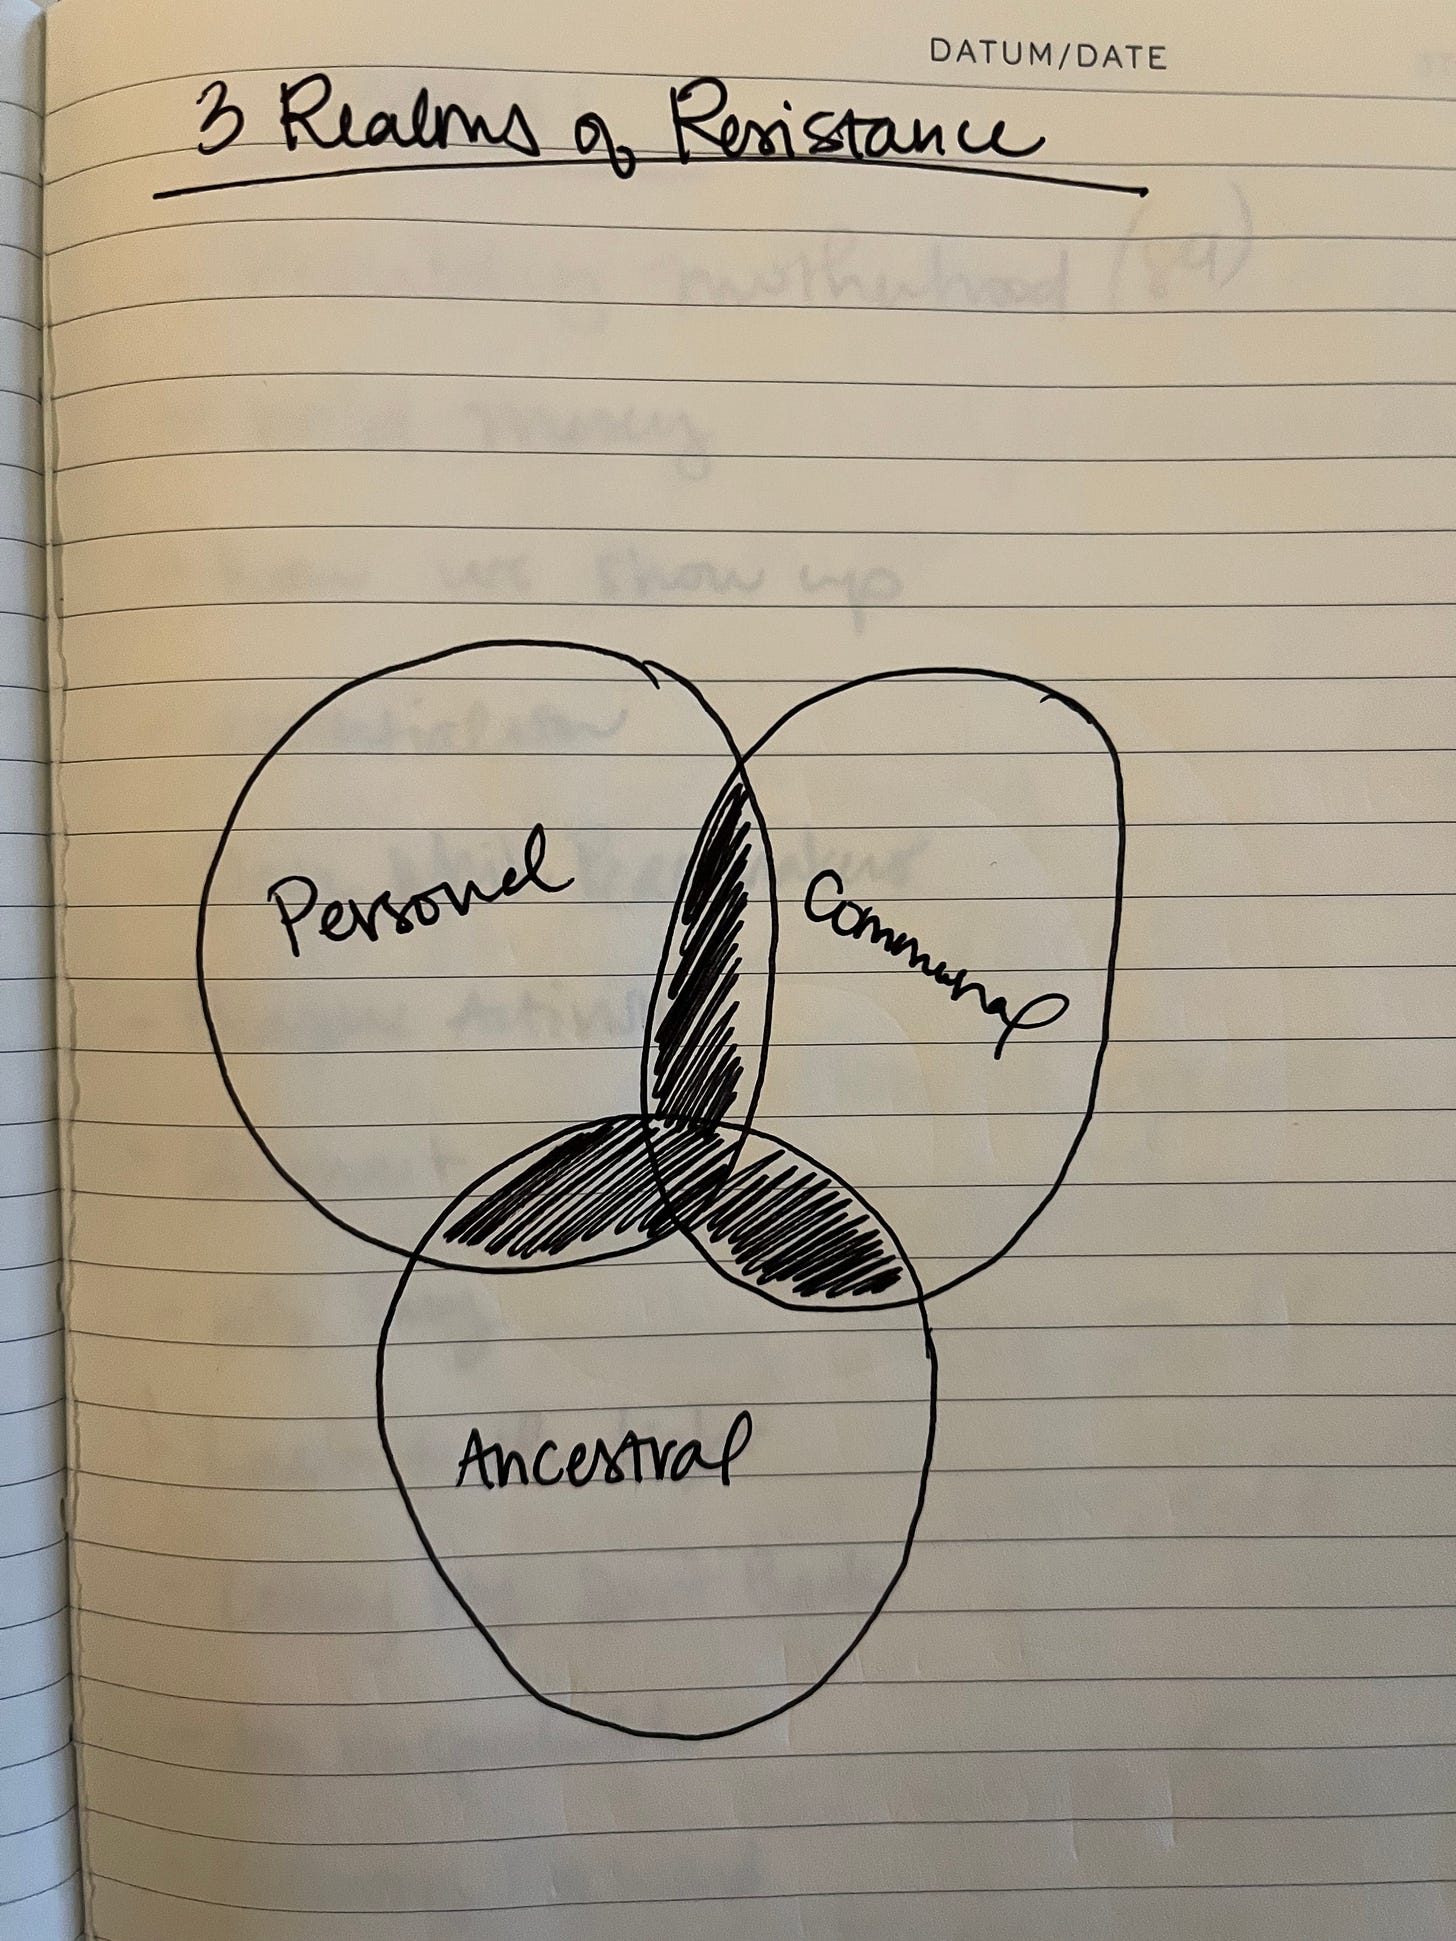 A hand-drawn picture of a Venn diagram with the communal, personal and ancestral realm drawn on them. The words "3 Realms of Resistance" at the top, my earliest sketch for the book